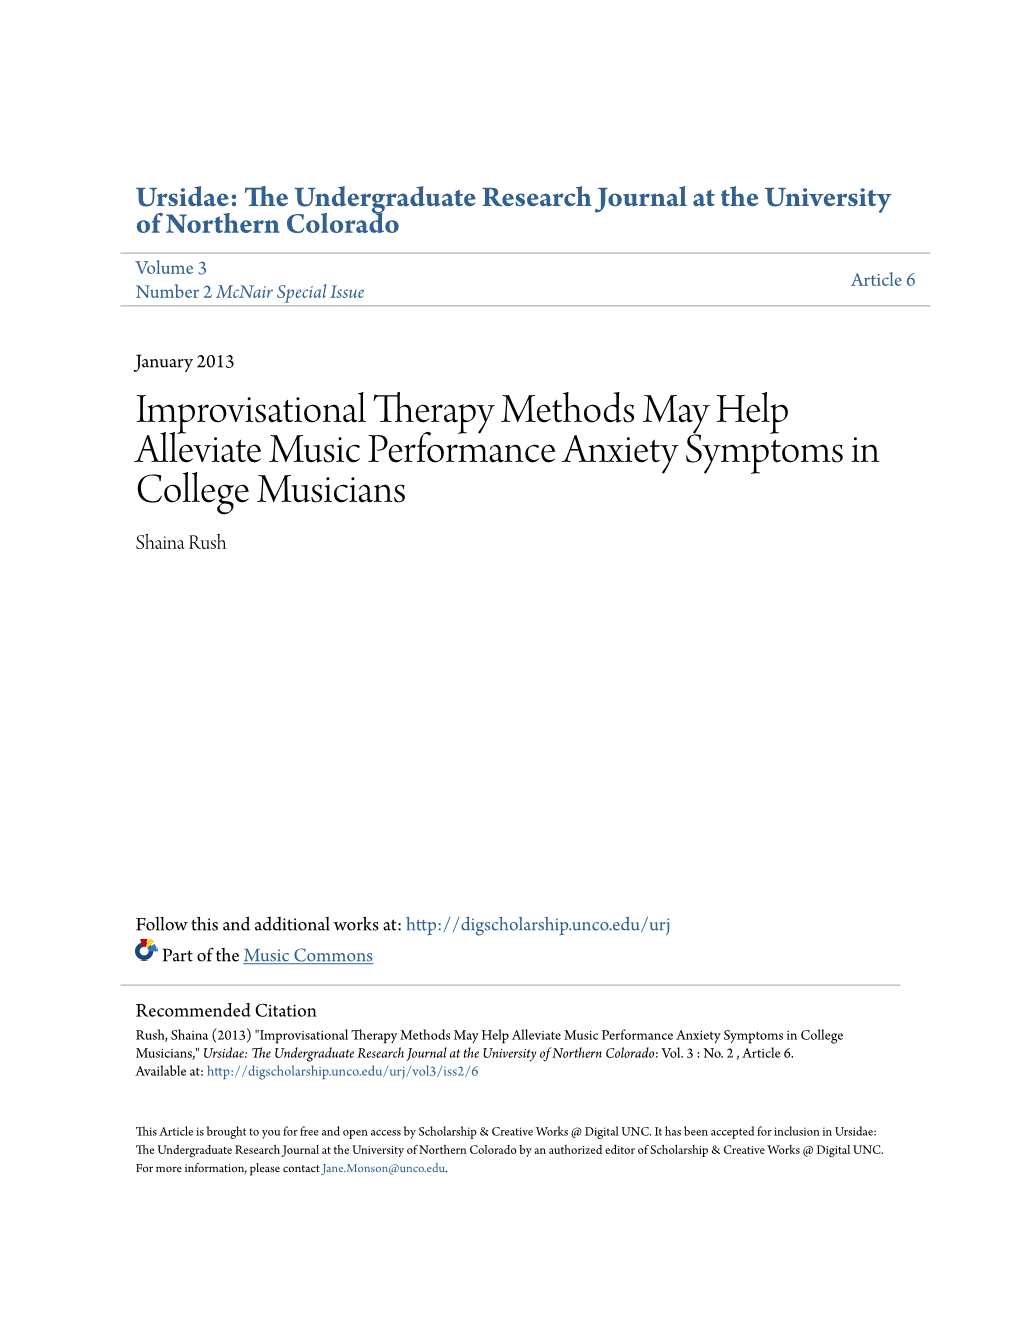 Improvisational Therapy Methods May Help Alleviate Music Performance Anxiety Symptoms in College Musicians Shaina Rush